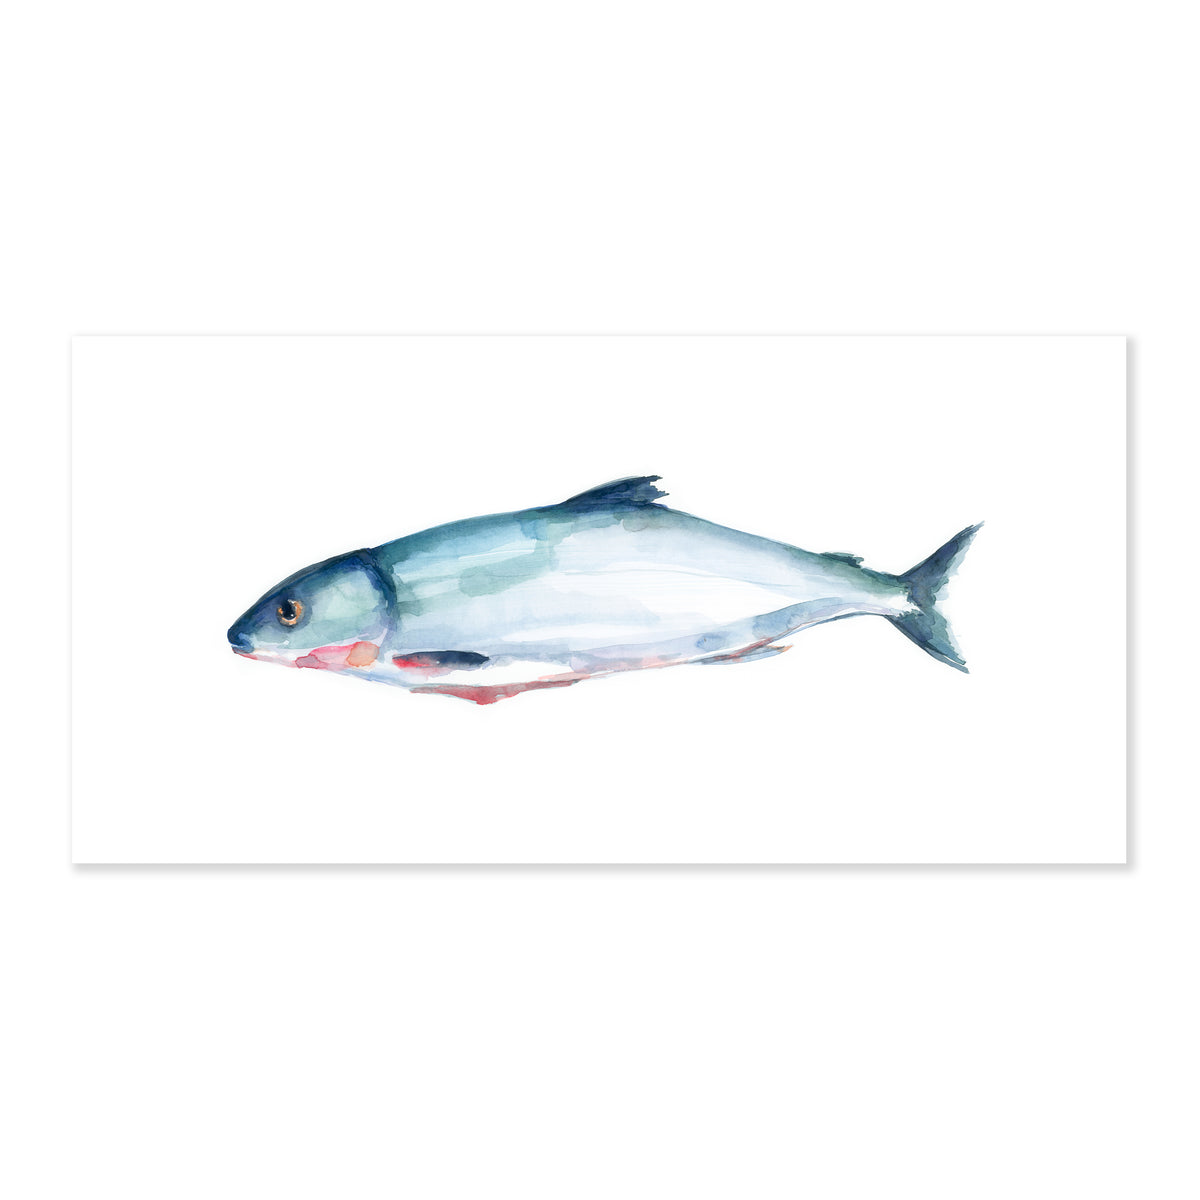 A fine art print illustrating a salmon fish painted with watercolors on a soft white background